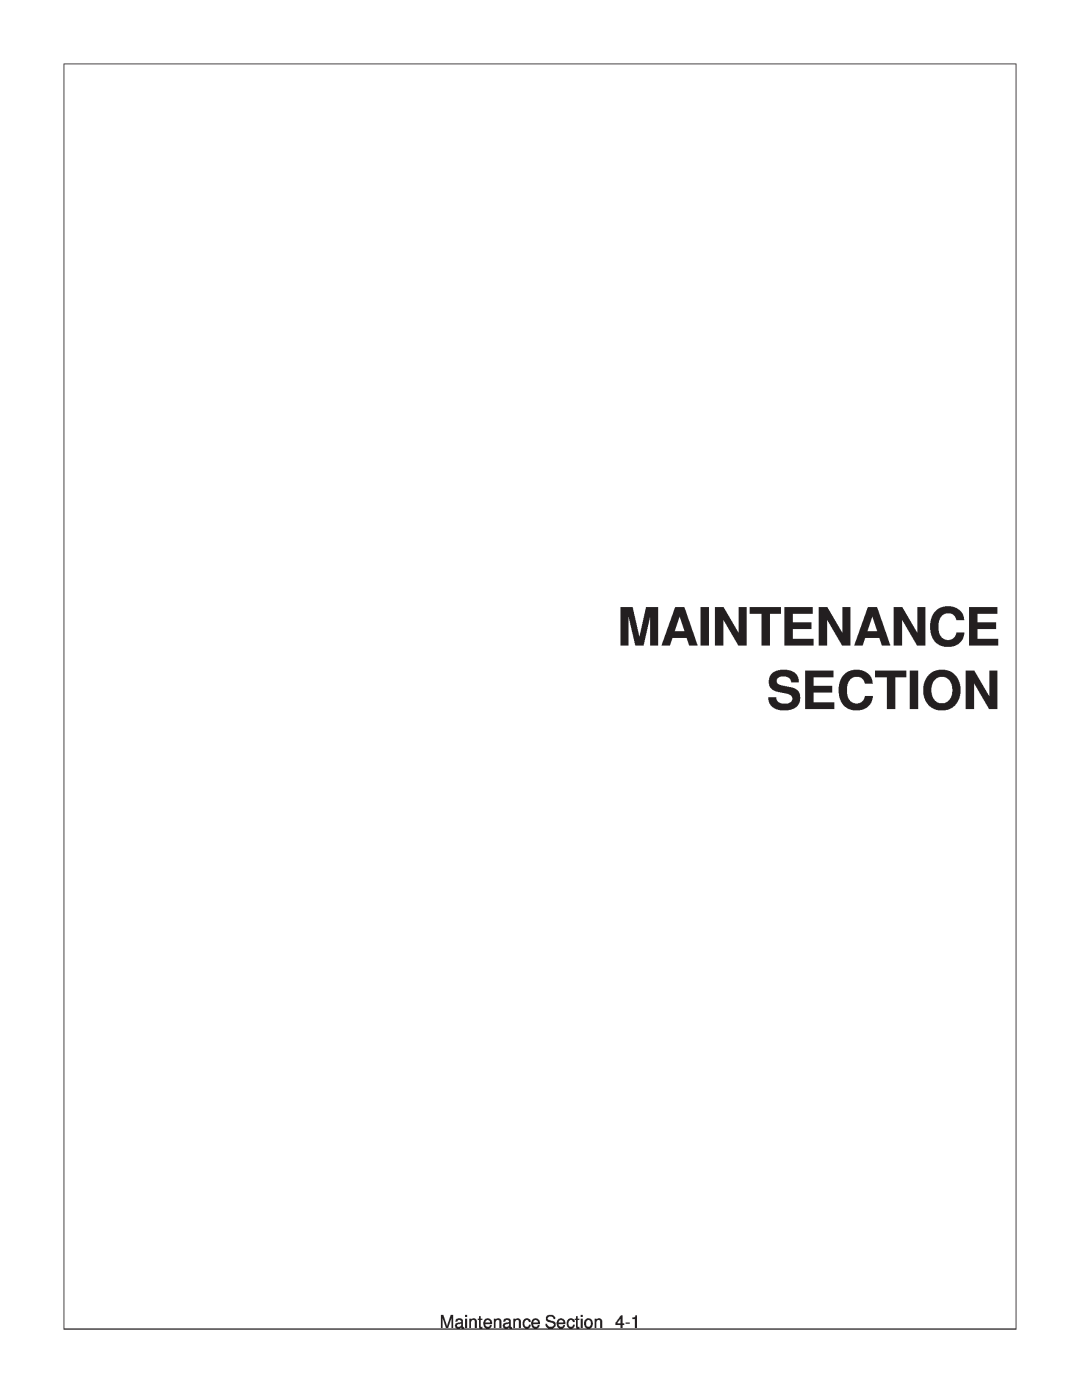 Tiger Products Co., Ltd TS 100A manual Maintenance Section 